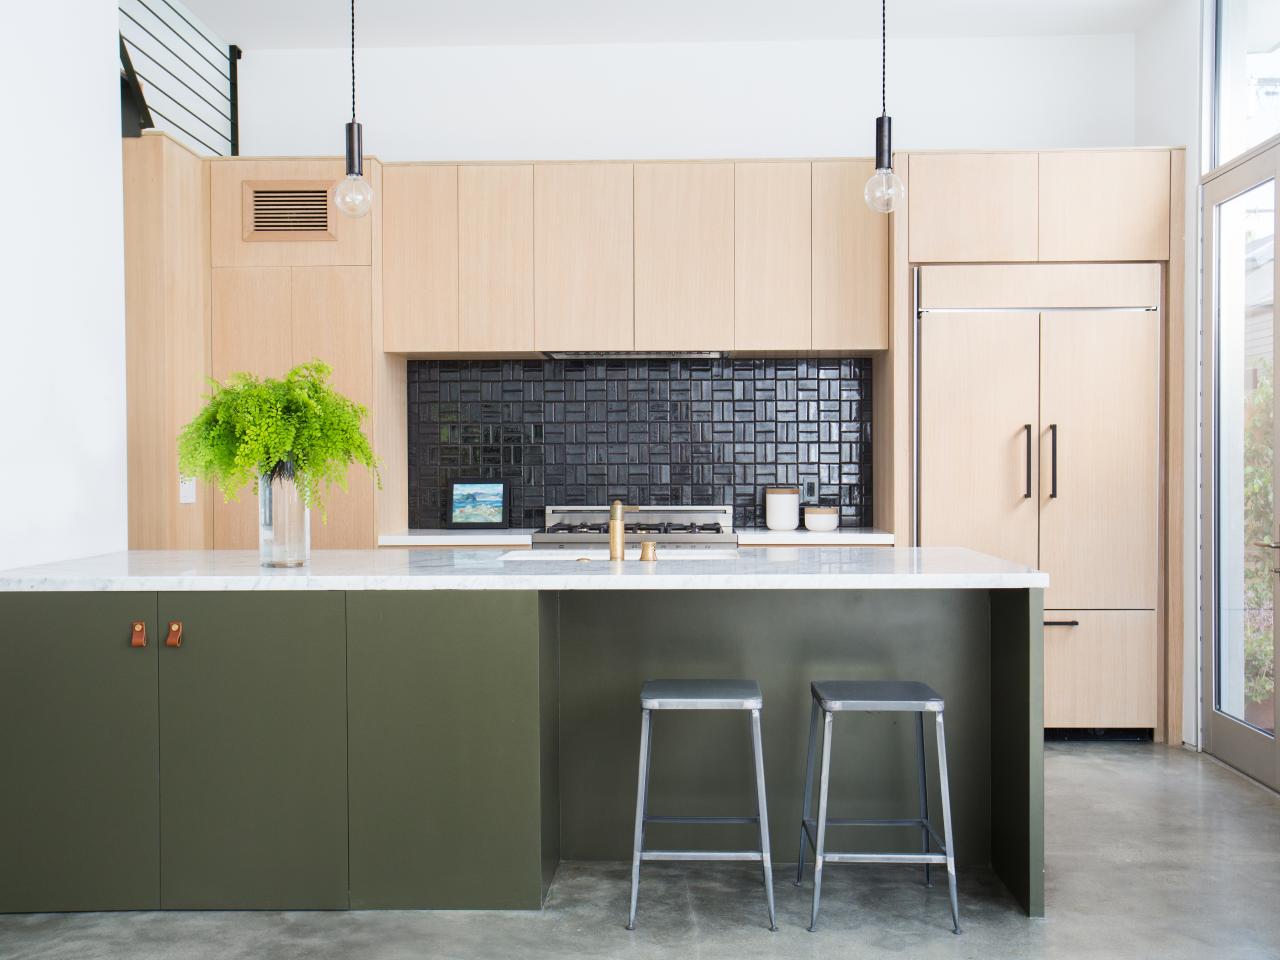 16 Modern Kitchen Design Ideas For Your Home